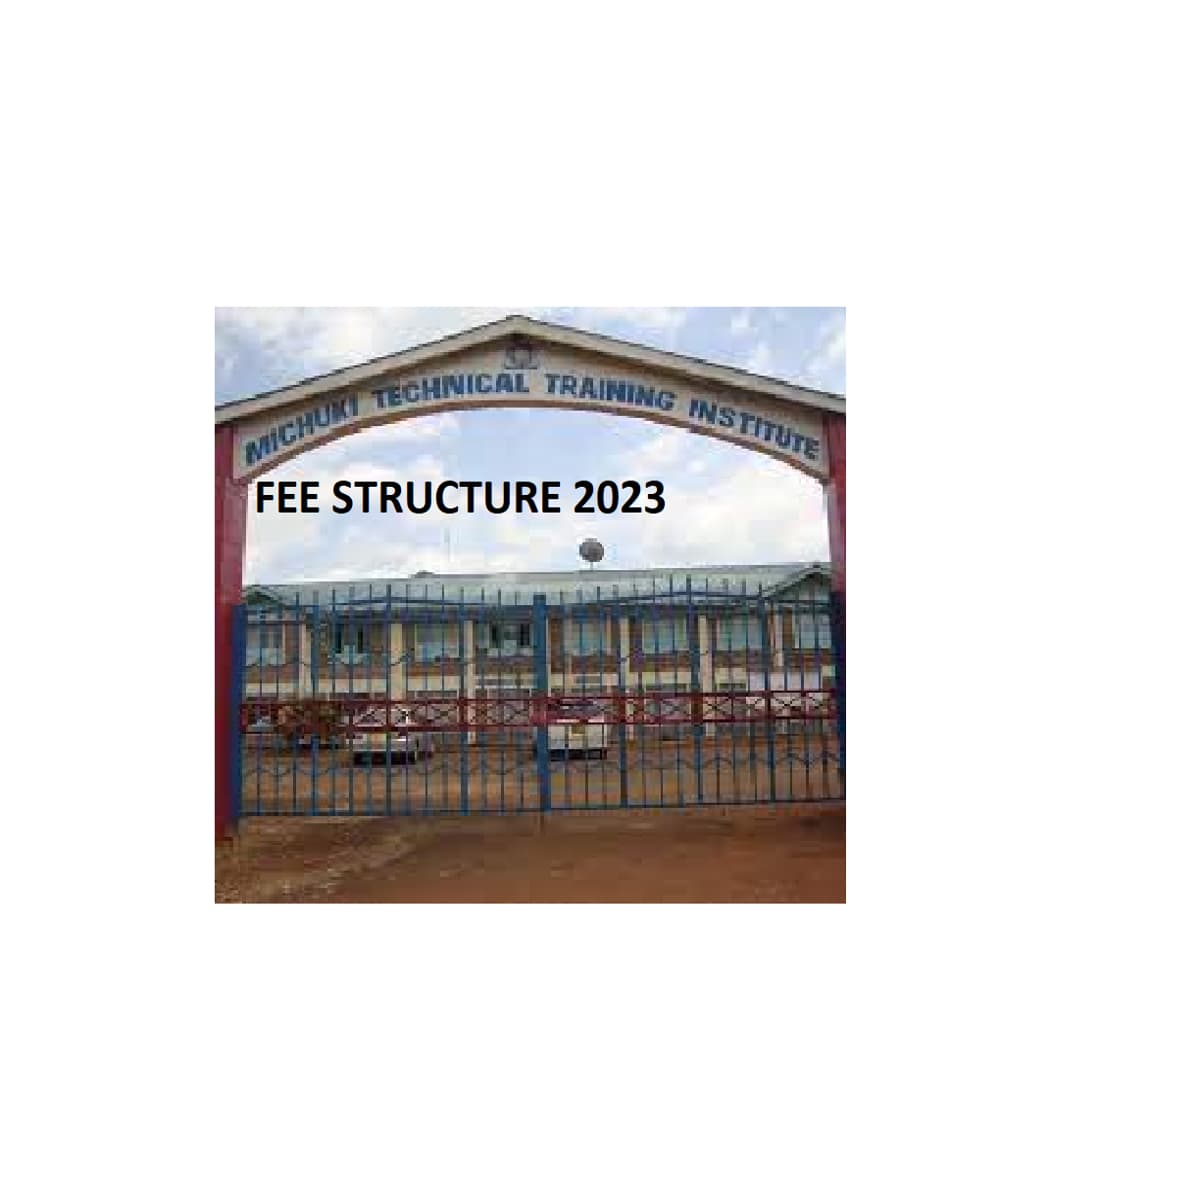 Michuki Technical Training Institute Fees Structure